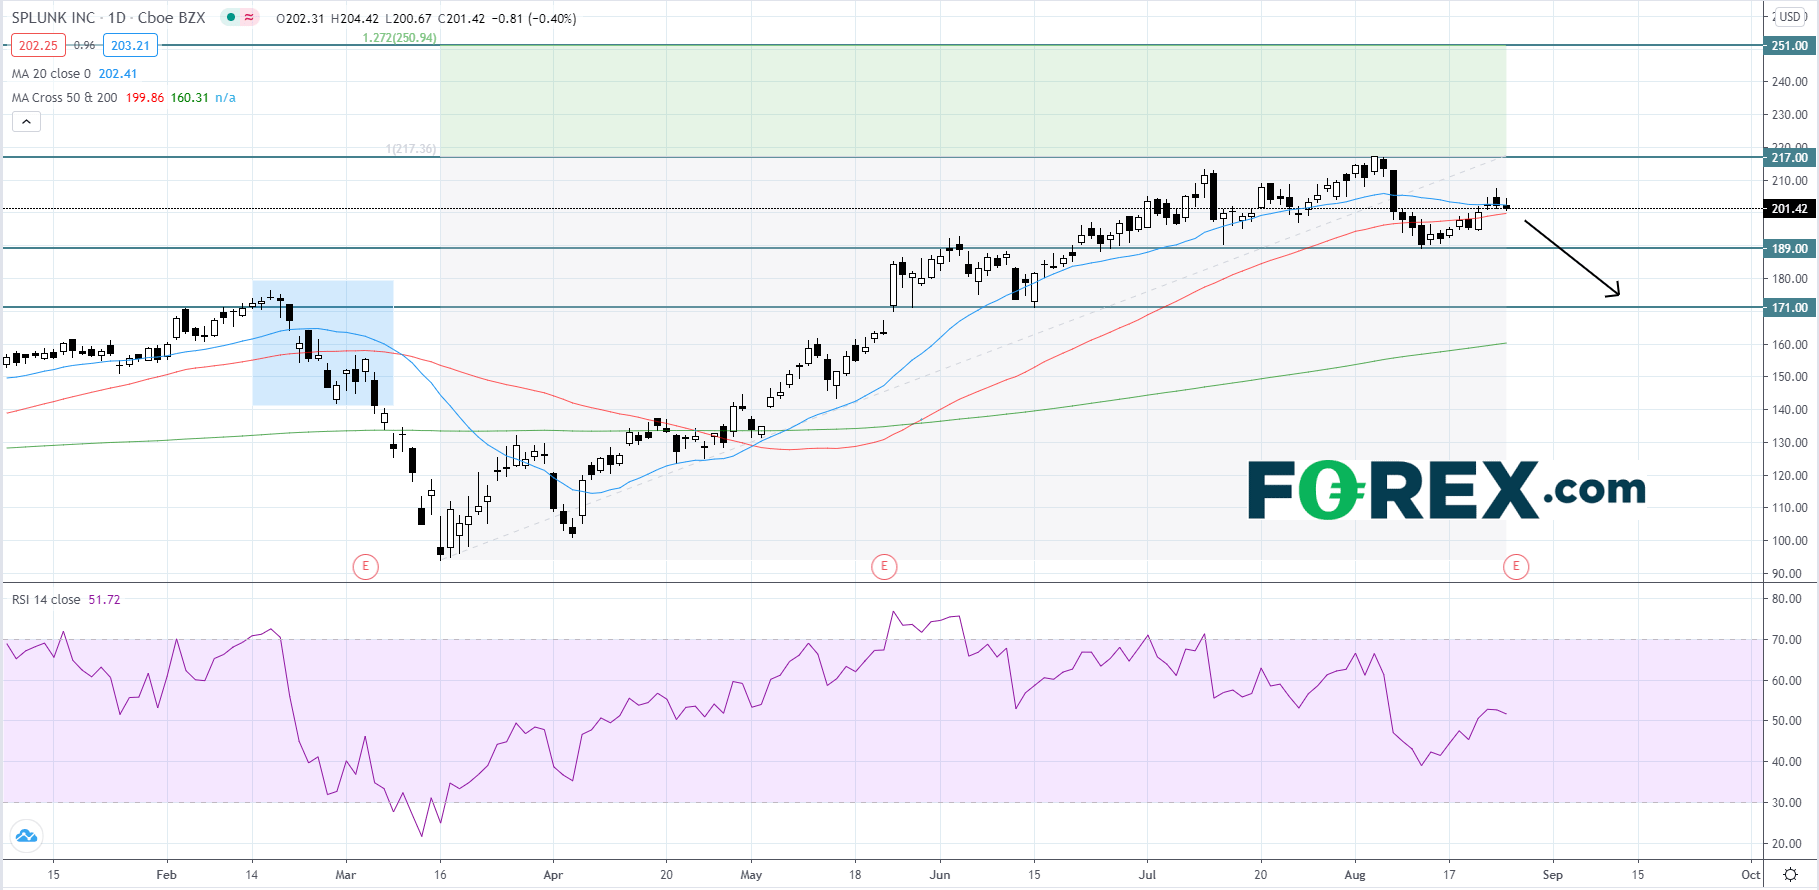 Chart analysis of Splunk. Published in August 2020 by FOREX.com